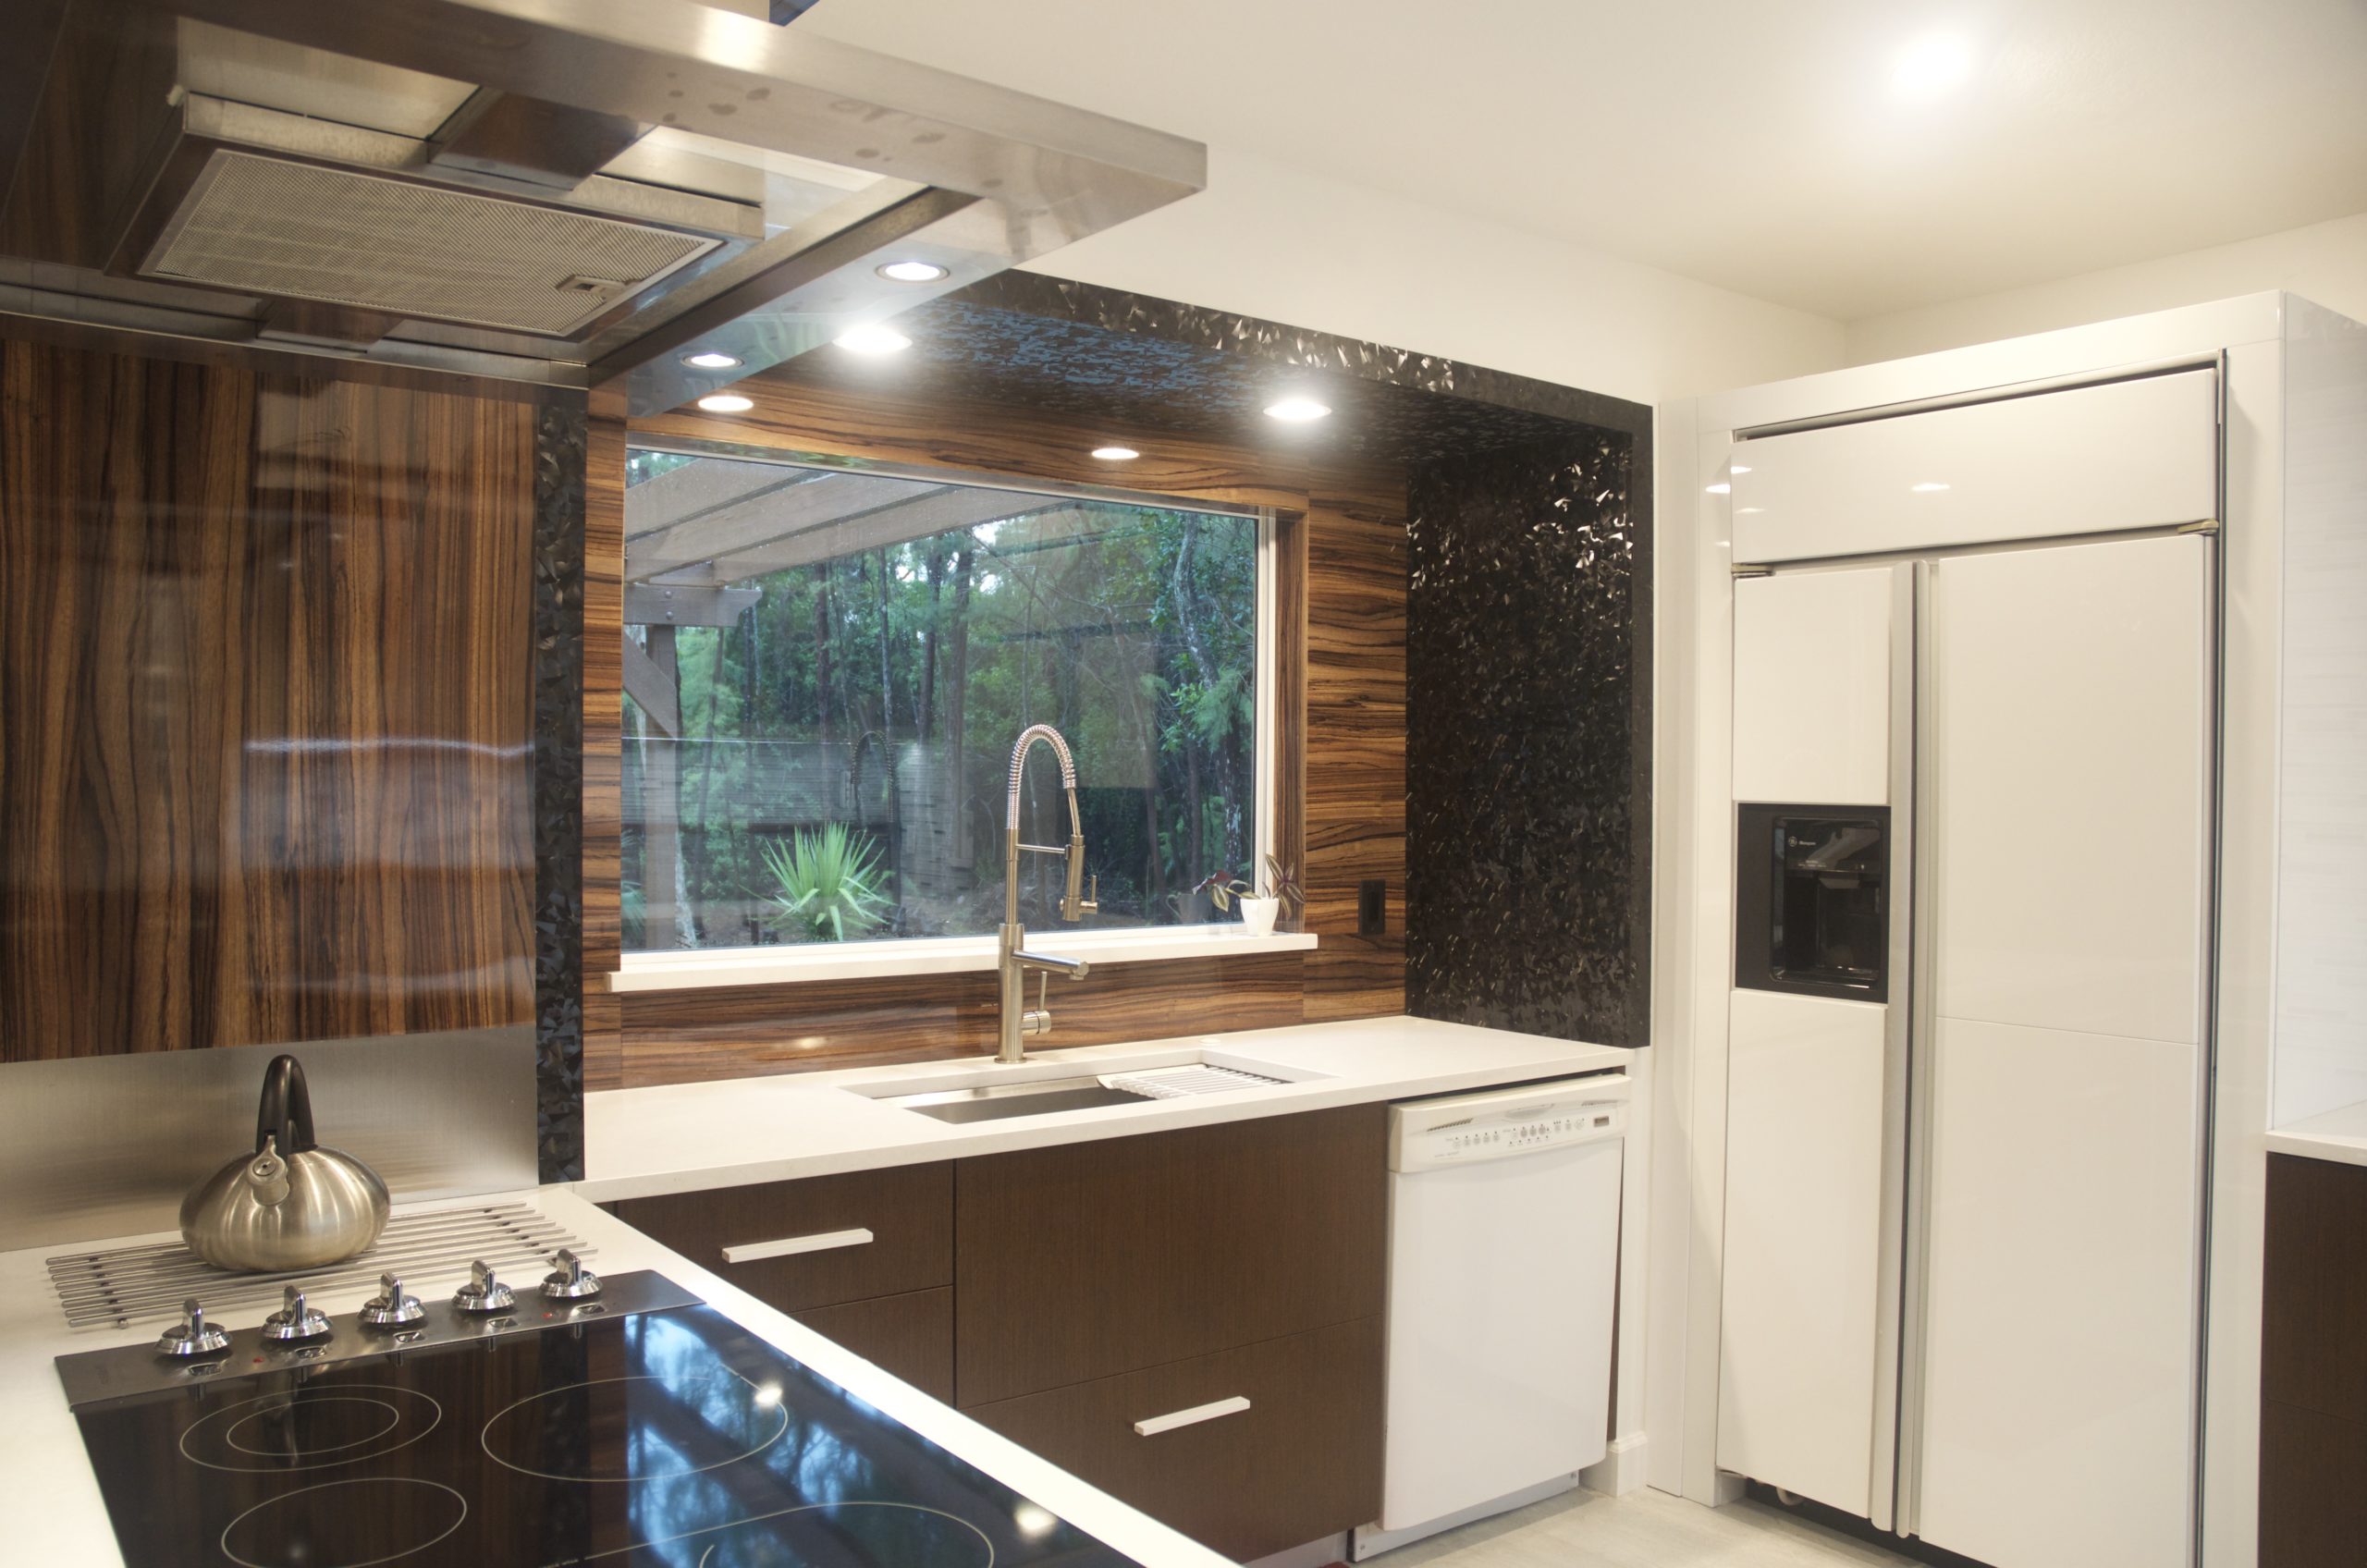 contemporary kitchen cabinets